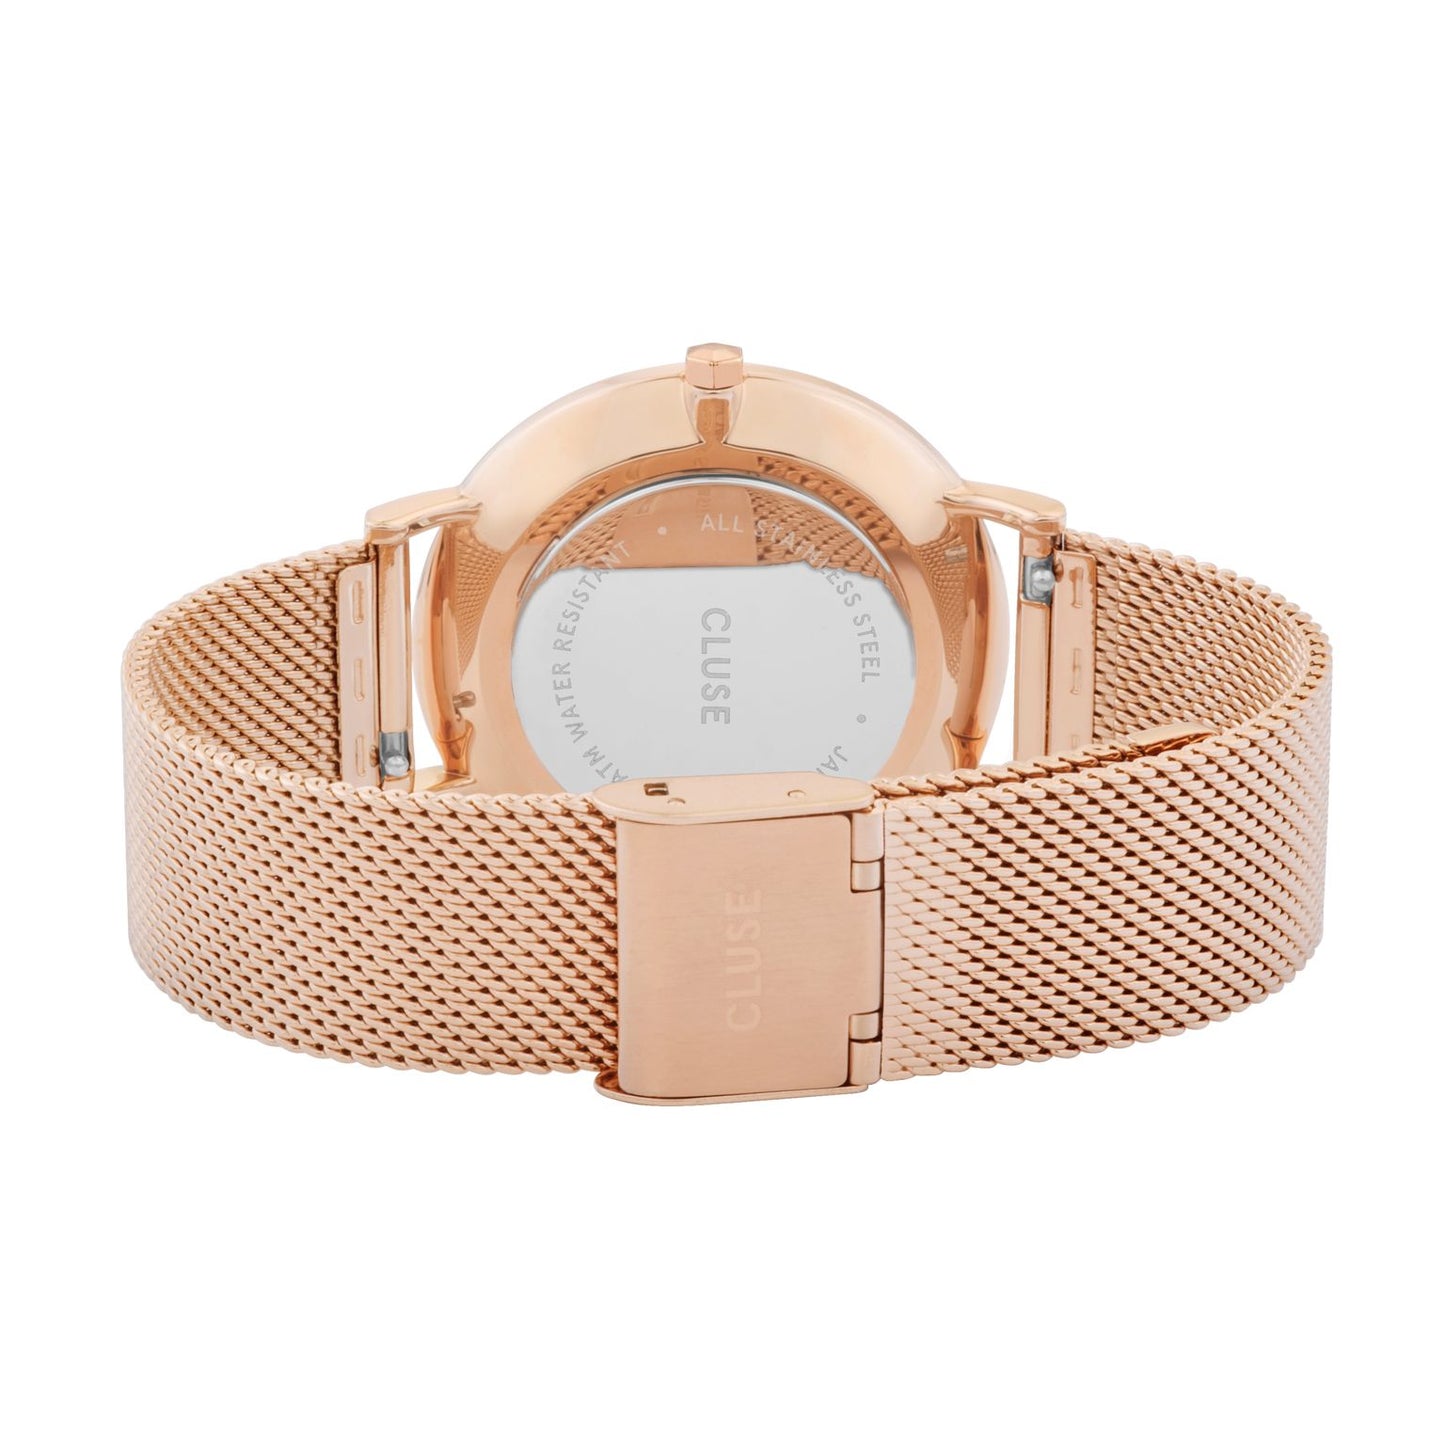 CLUSE ROSE GOLD BOHO CHIC WATCH